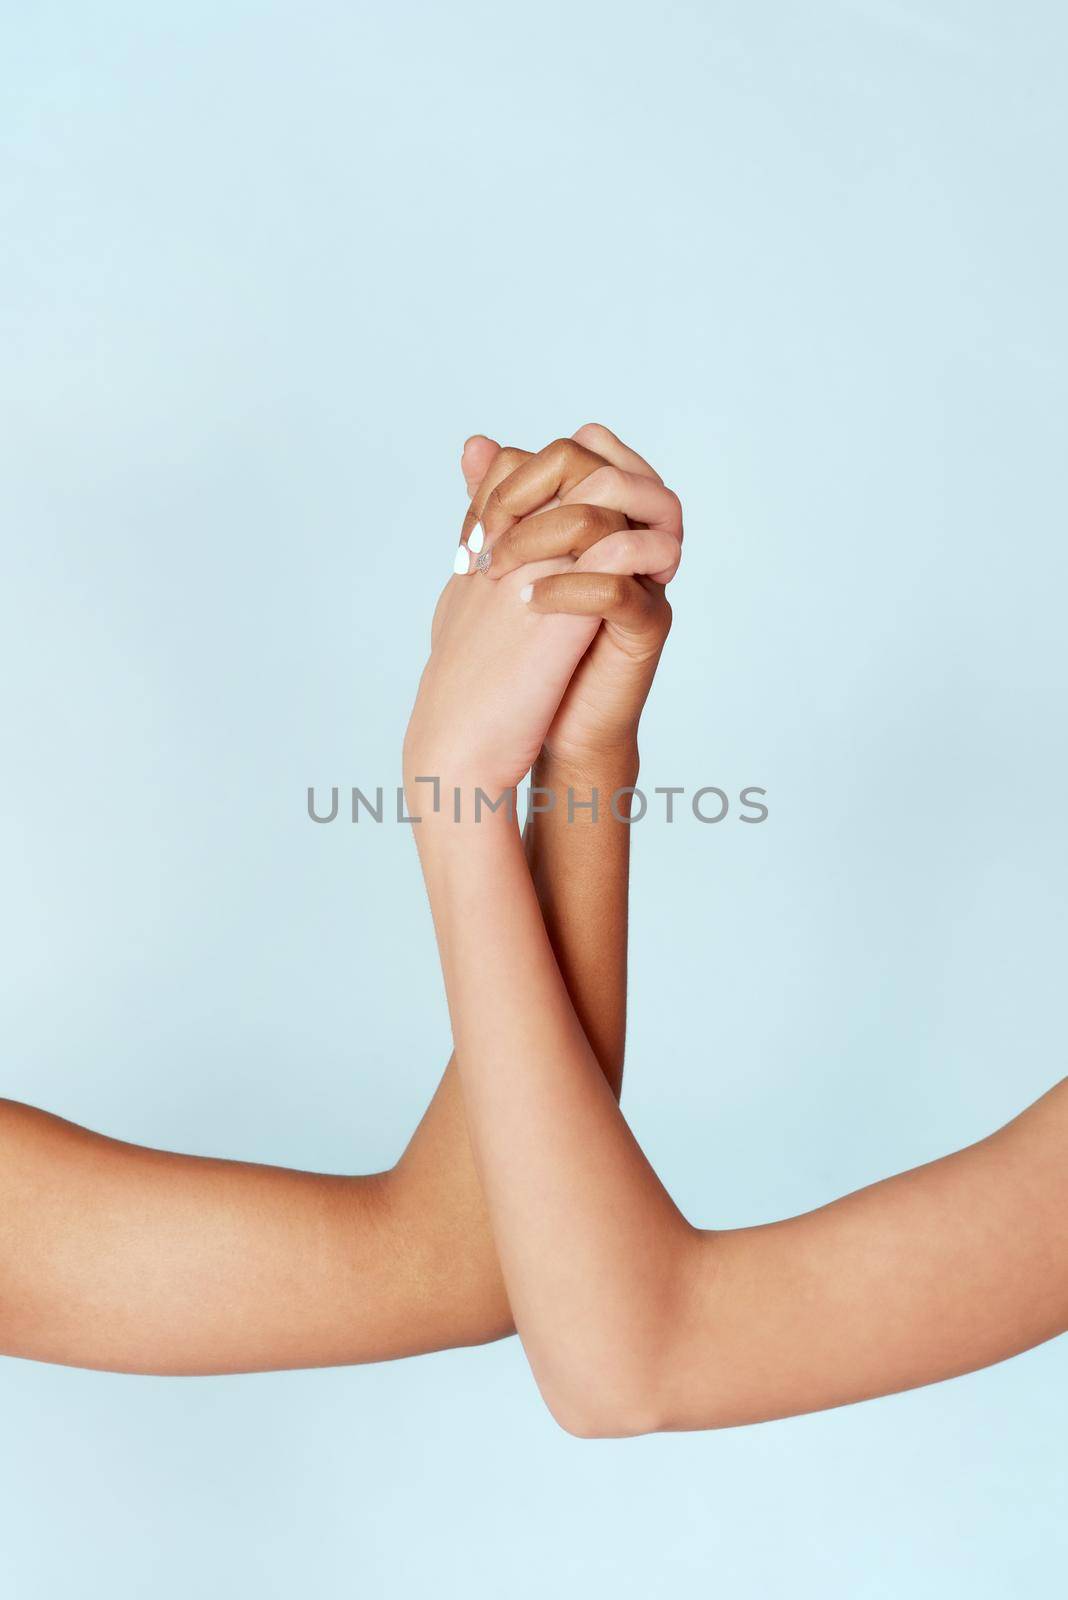 White and black women hold hands with clasped fingers. Diverse hands showing unity. Stop racism. Everyone's lives matter.